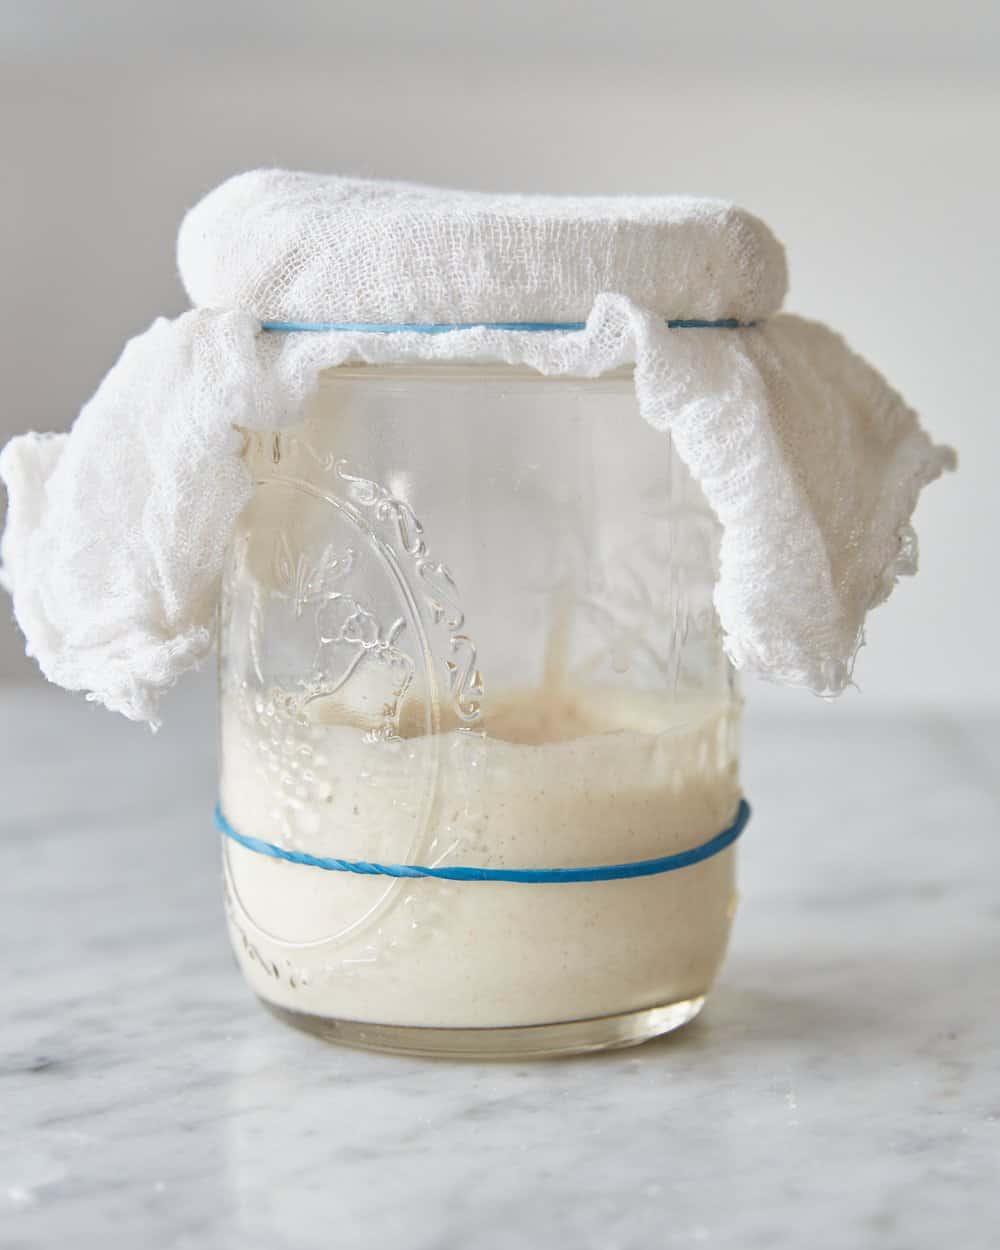 a collapsed sourdough starter in a jar